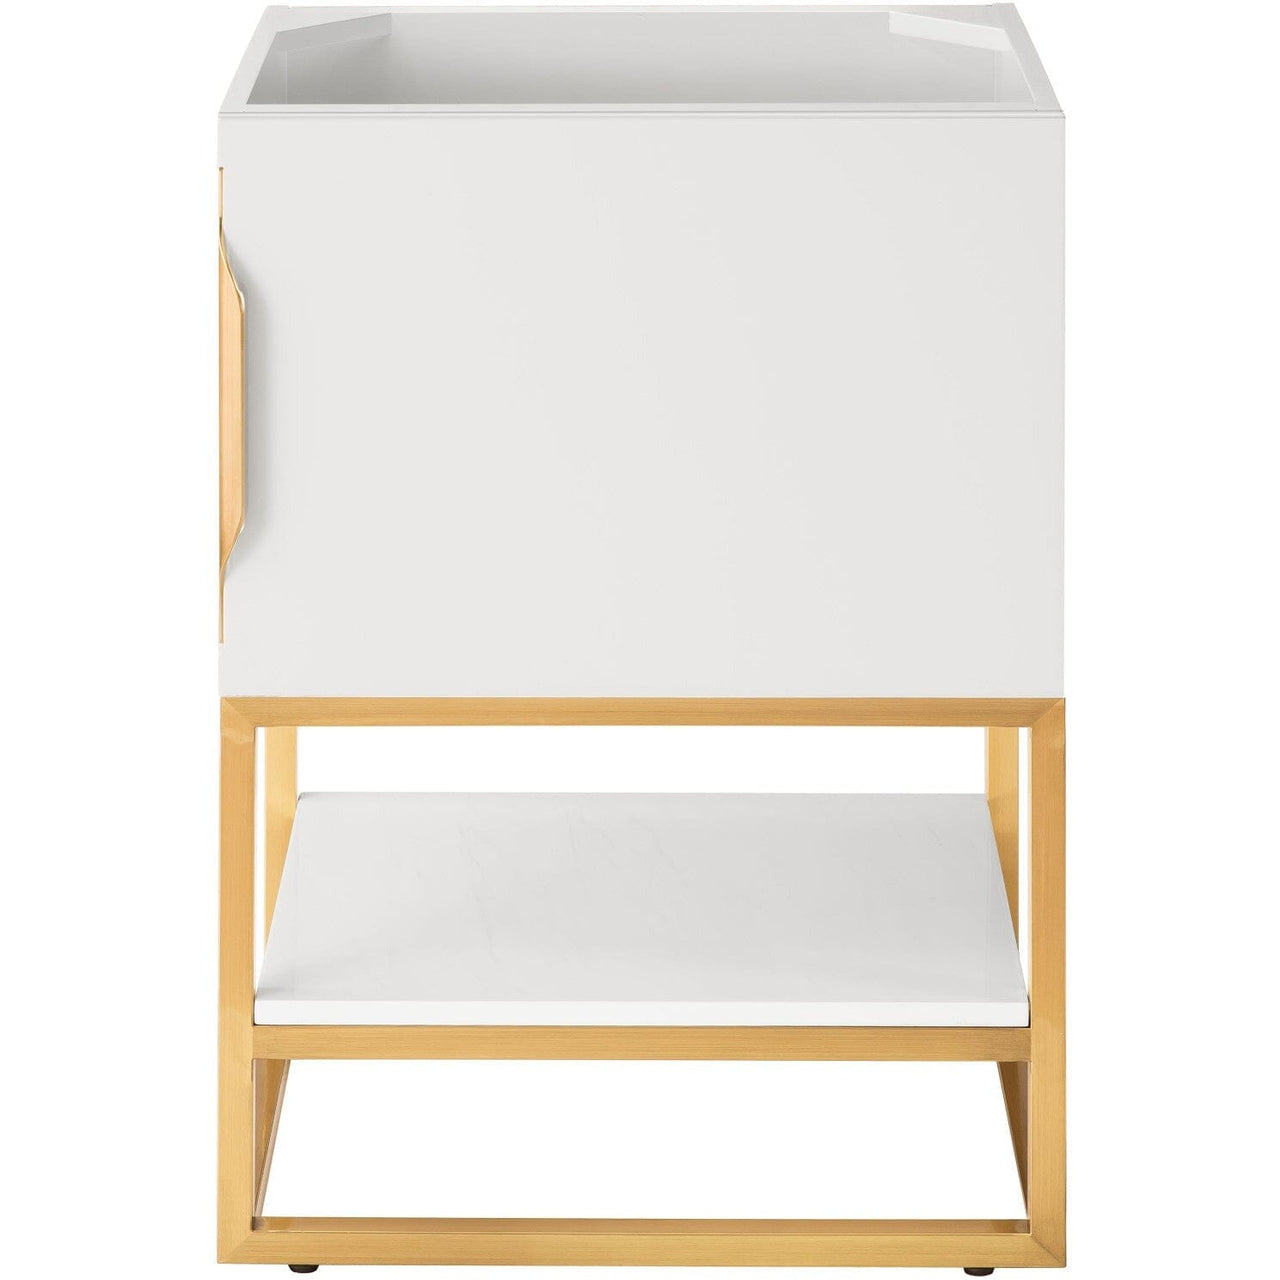 James Martin Columbia 24" Single Vanity Vanity James Martin Glossy White - Radiant Gold Cabinet Only 